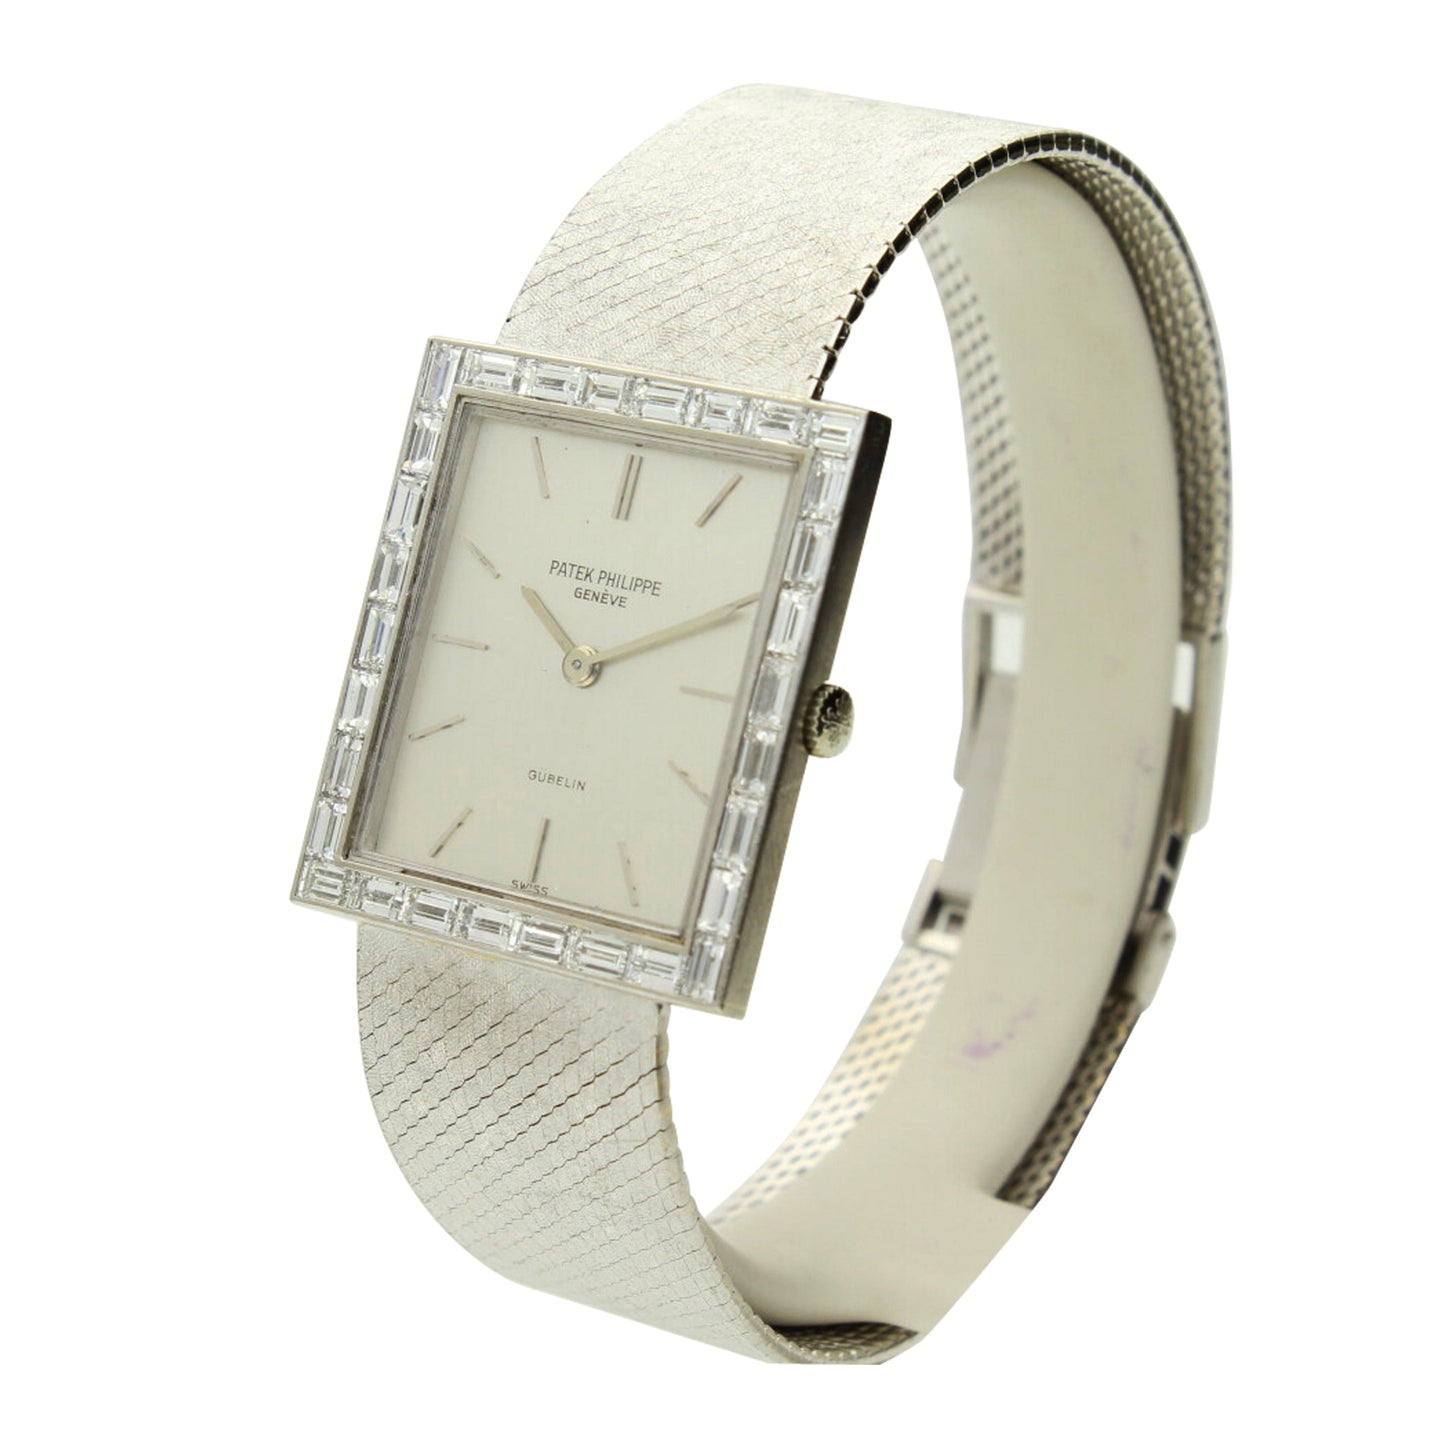 18ct white gold square cased wristwatch with diamond set bezel. Made 1970's